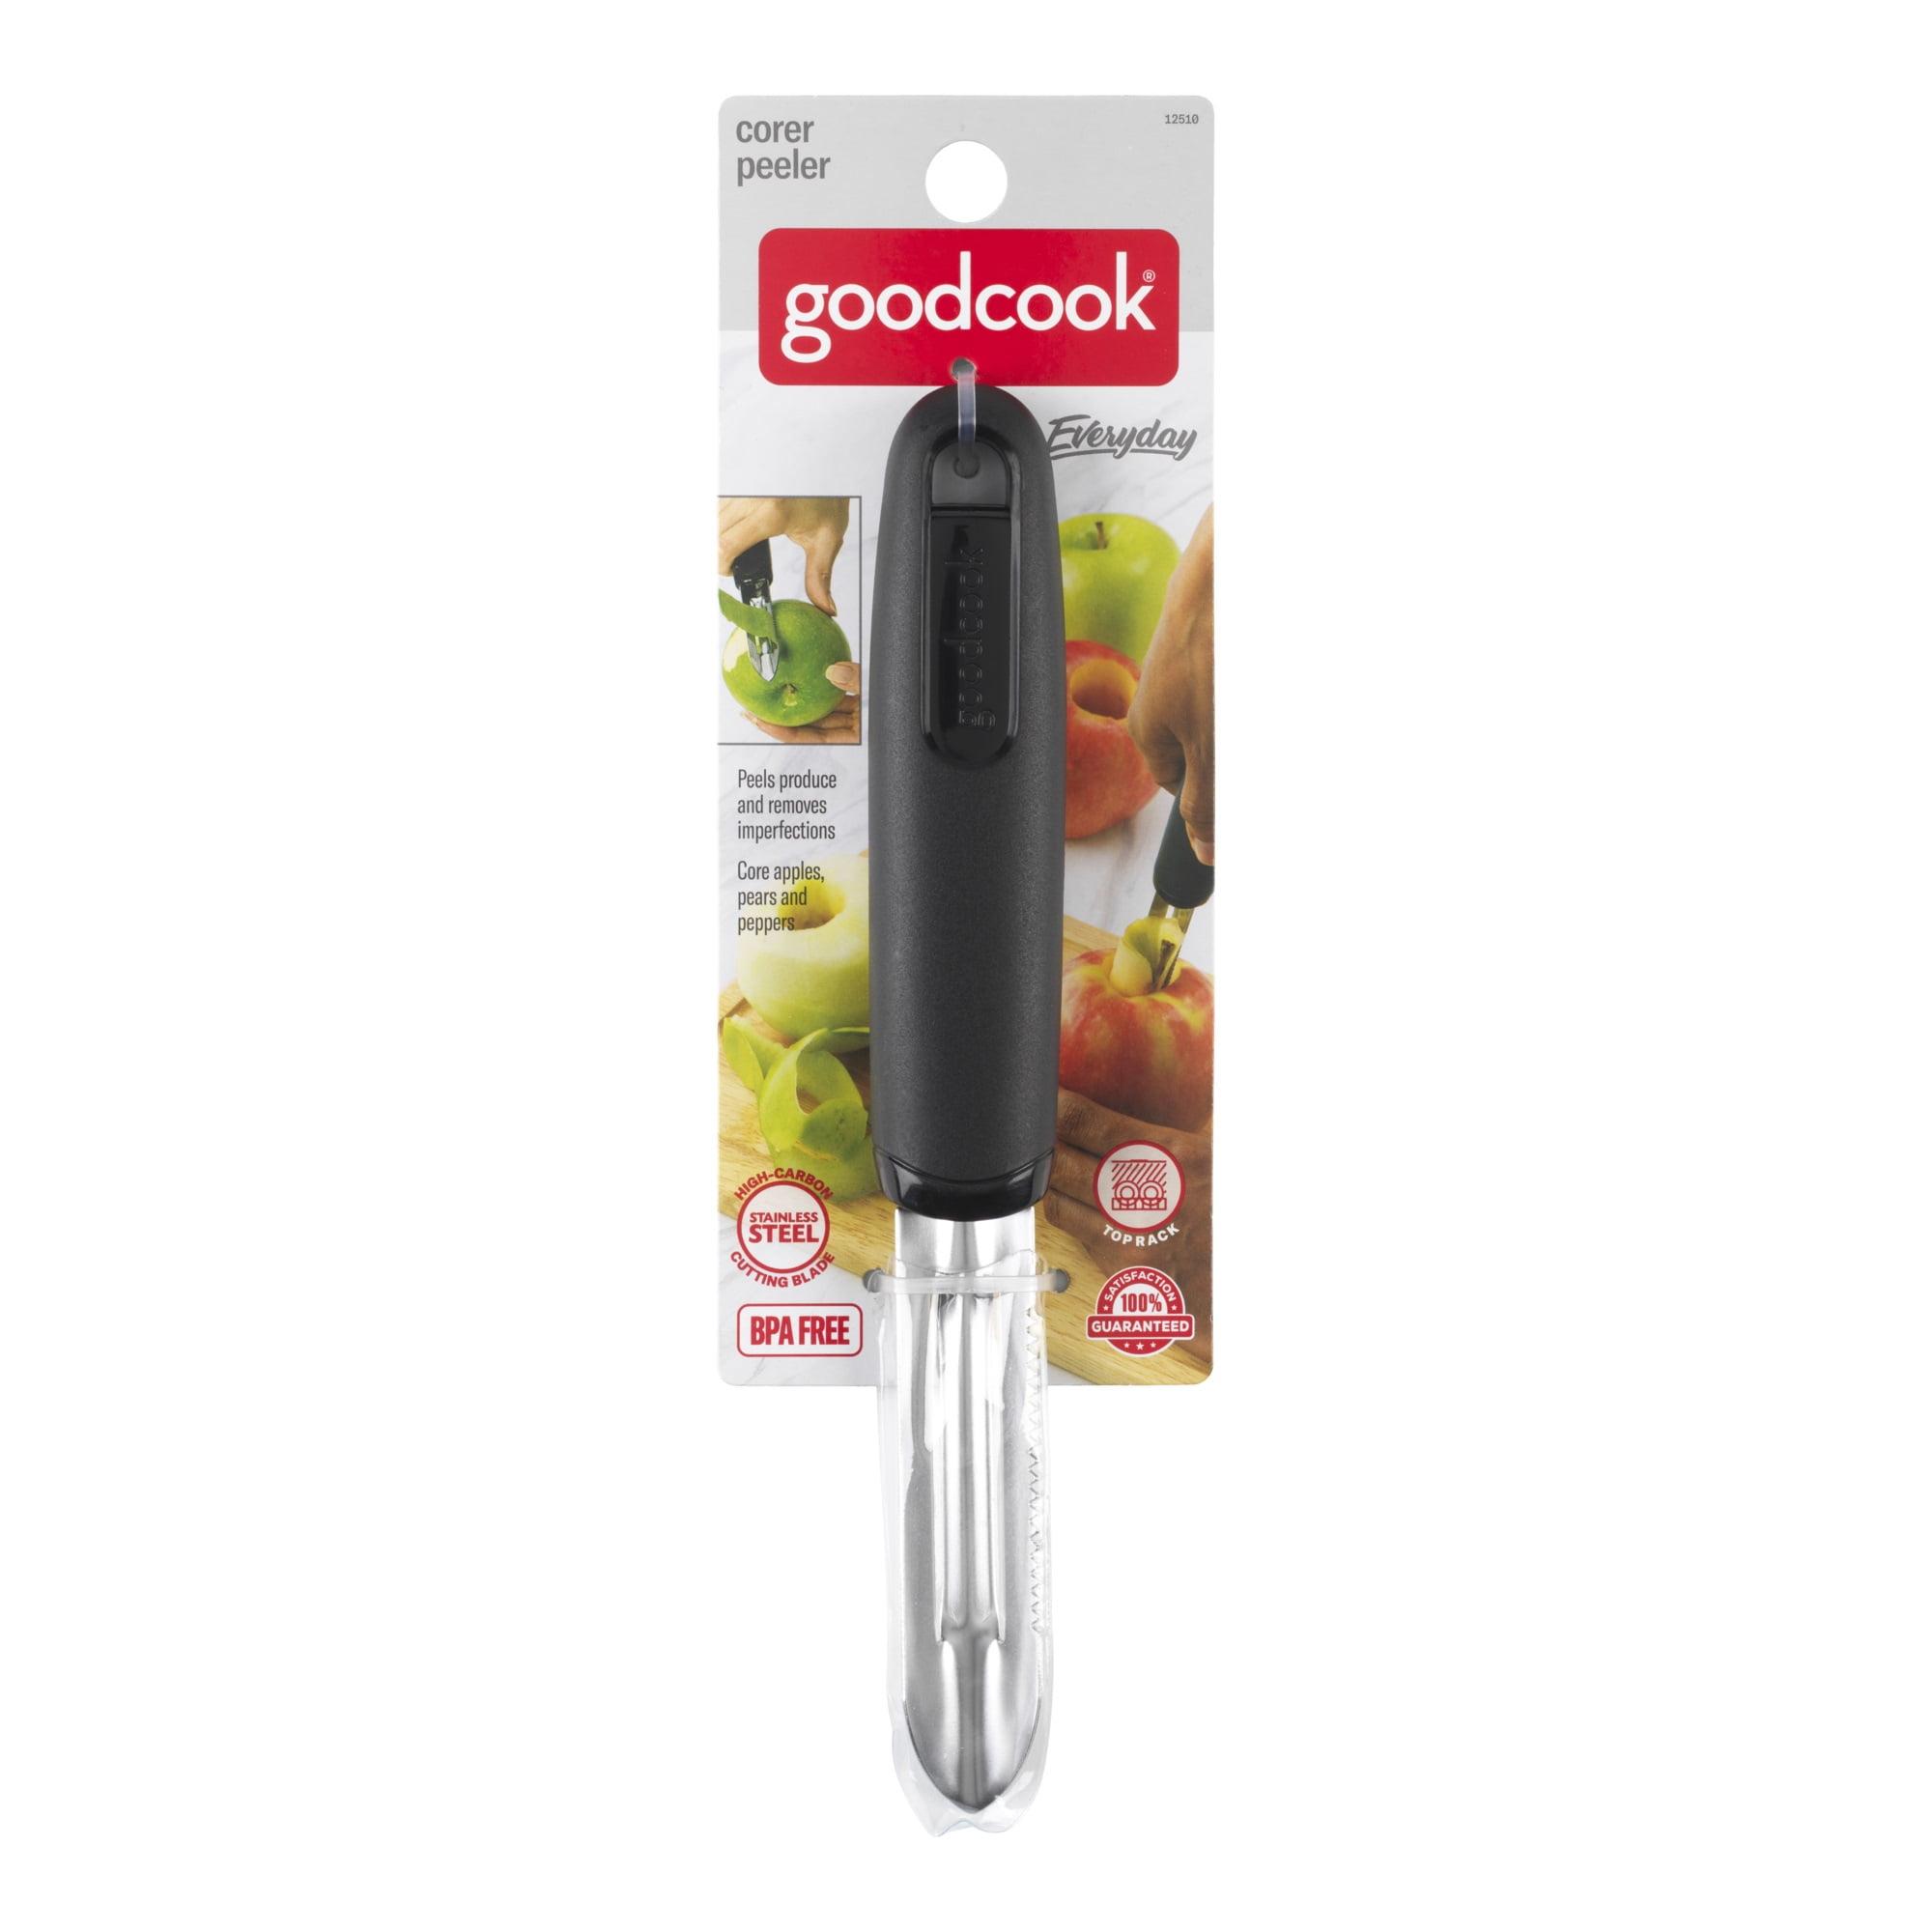 GoodCook 10.8 Stainless Steel Fruit and Vegetable Peeler and Corer, Black  